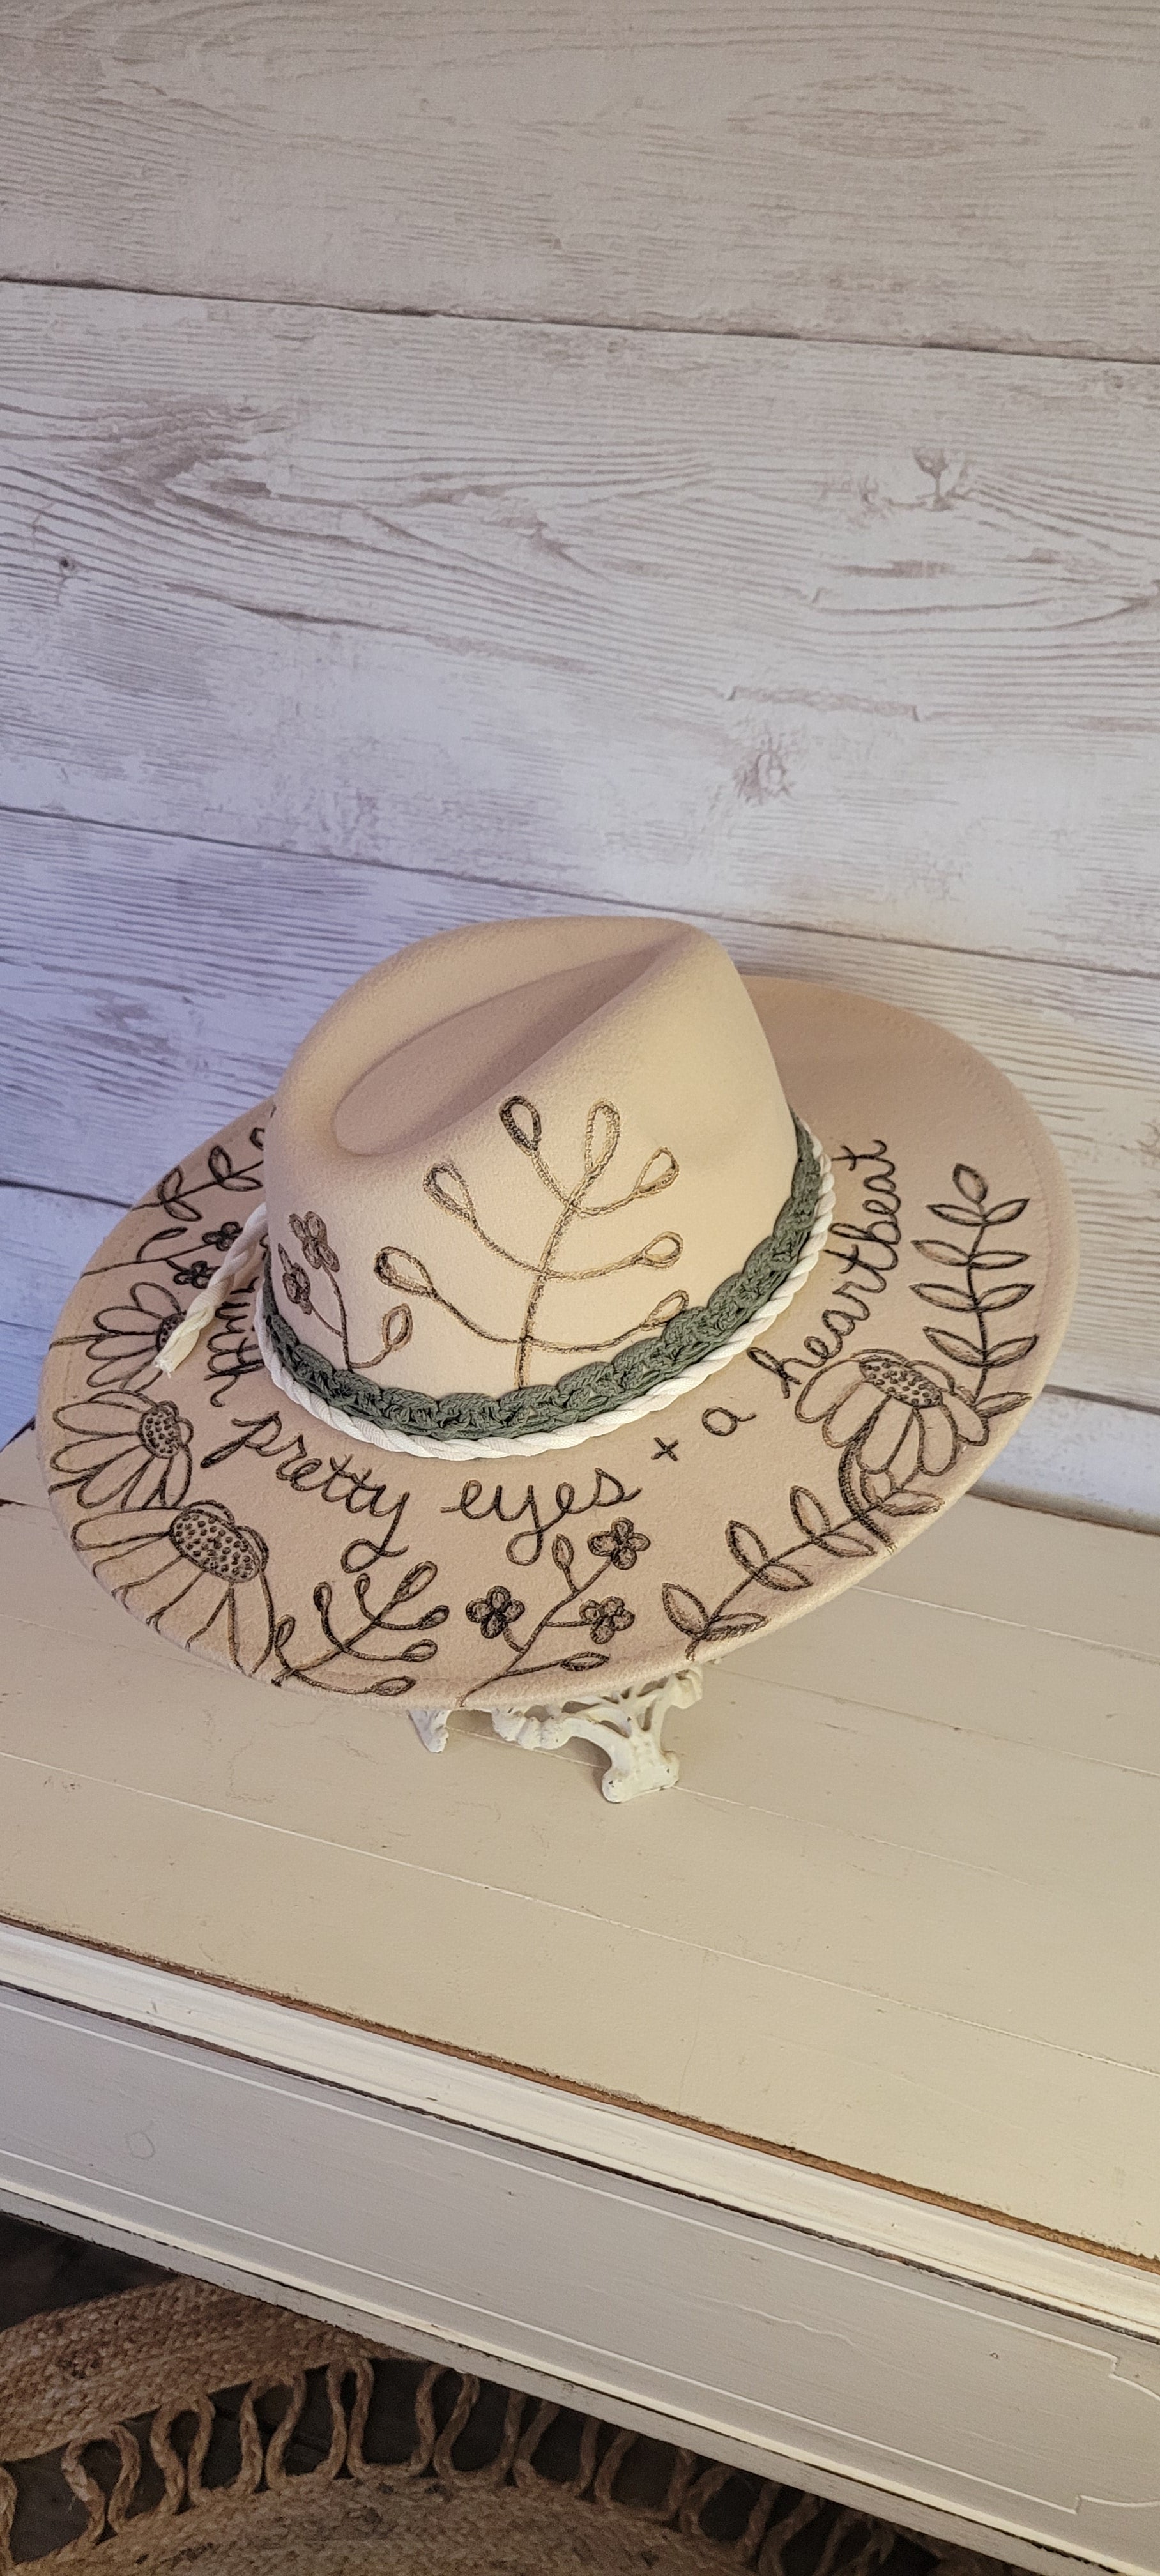 Features engraved whimsical flowers & plants Felt hat Flat brim 65% polyester and 35% cotton Ribbon drawstring for hat size adjustment Head Circumference: 25" H:5.25" L:16" W:14.5" Head Circumference: 24" Crown Height: 5" Brim Length: 15.75" Brim Width: 14.5" Branded & numbered inside crown Custom engraved by Kayla